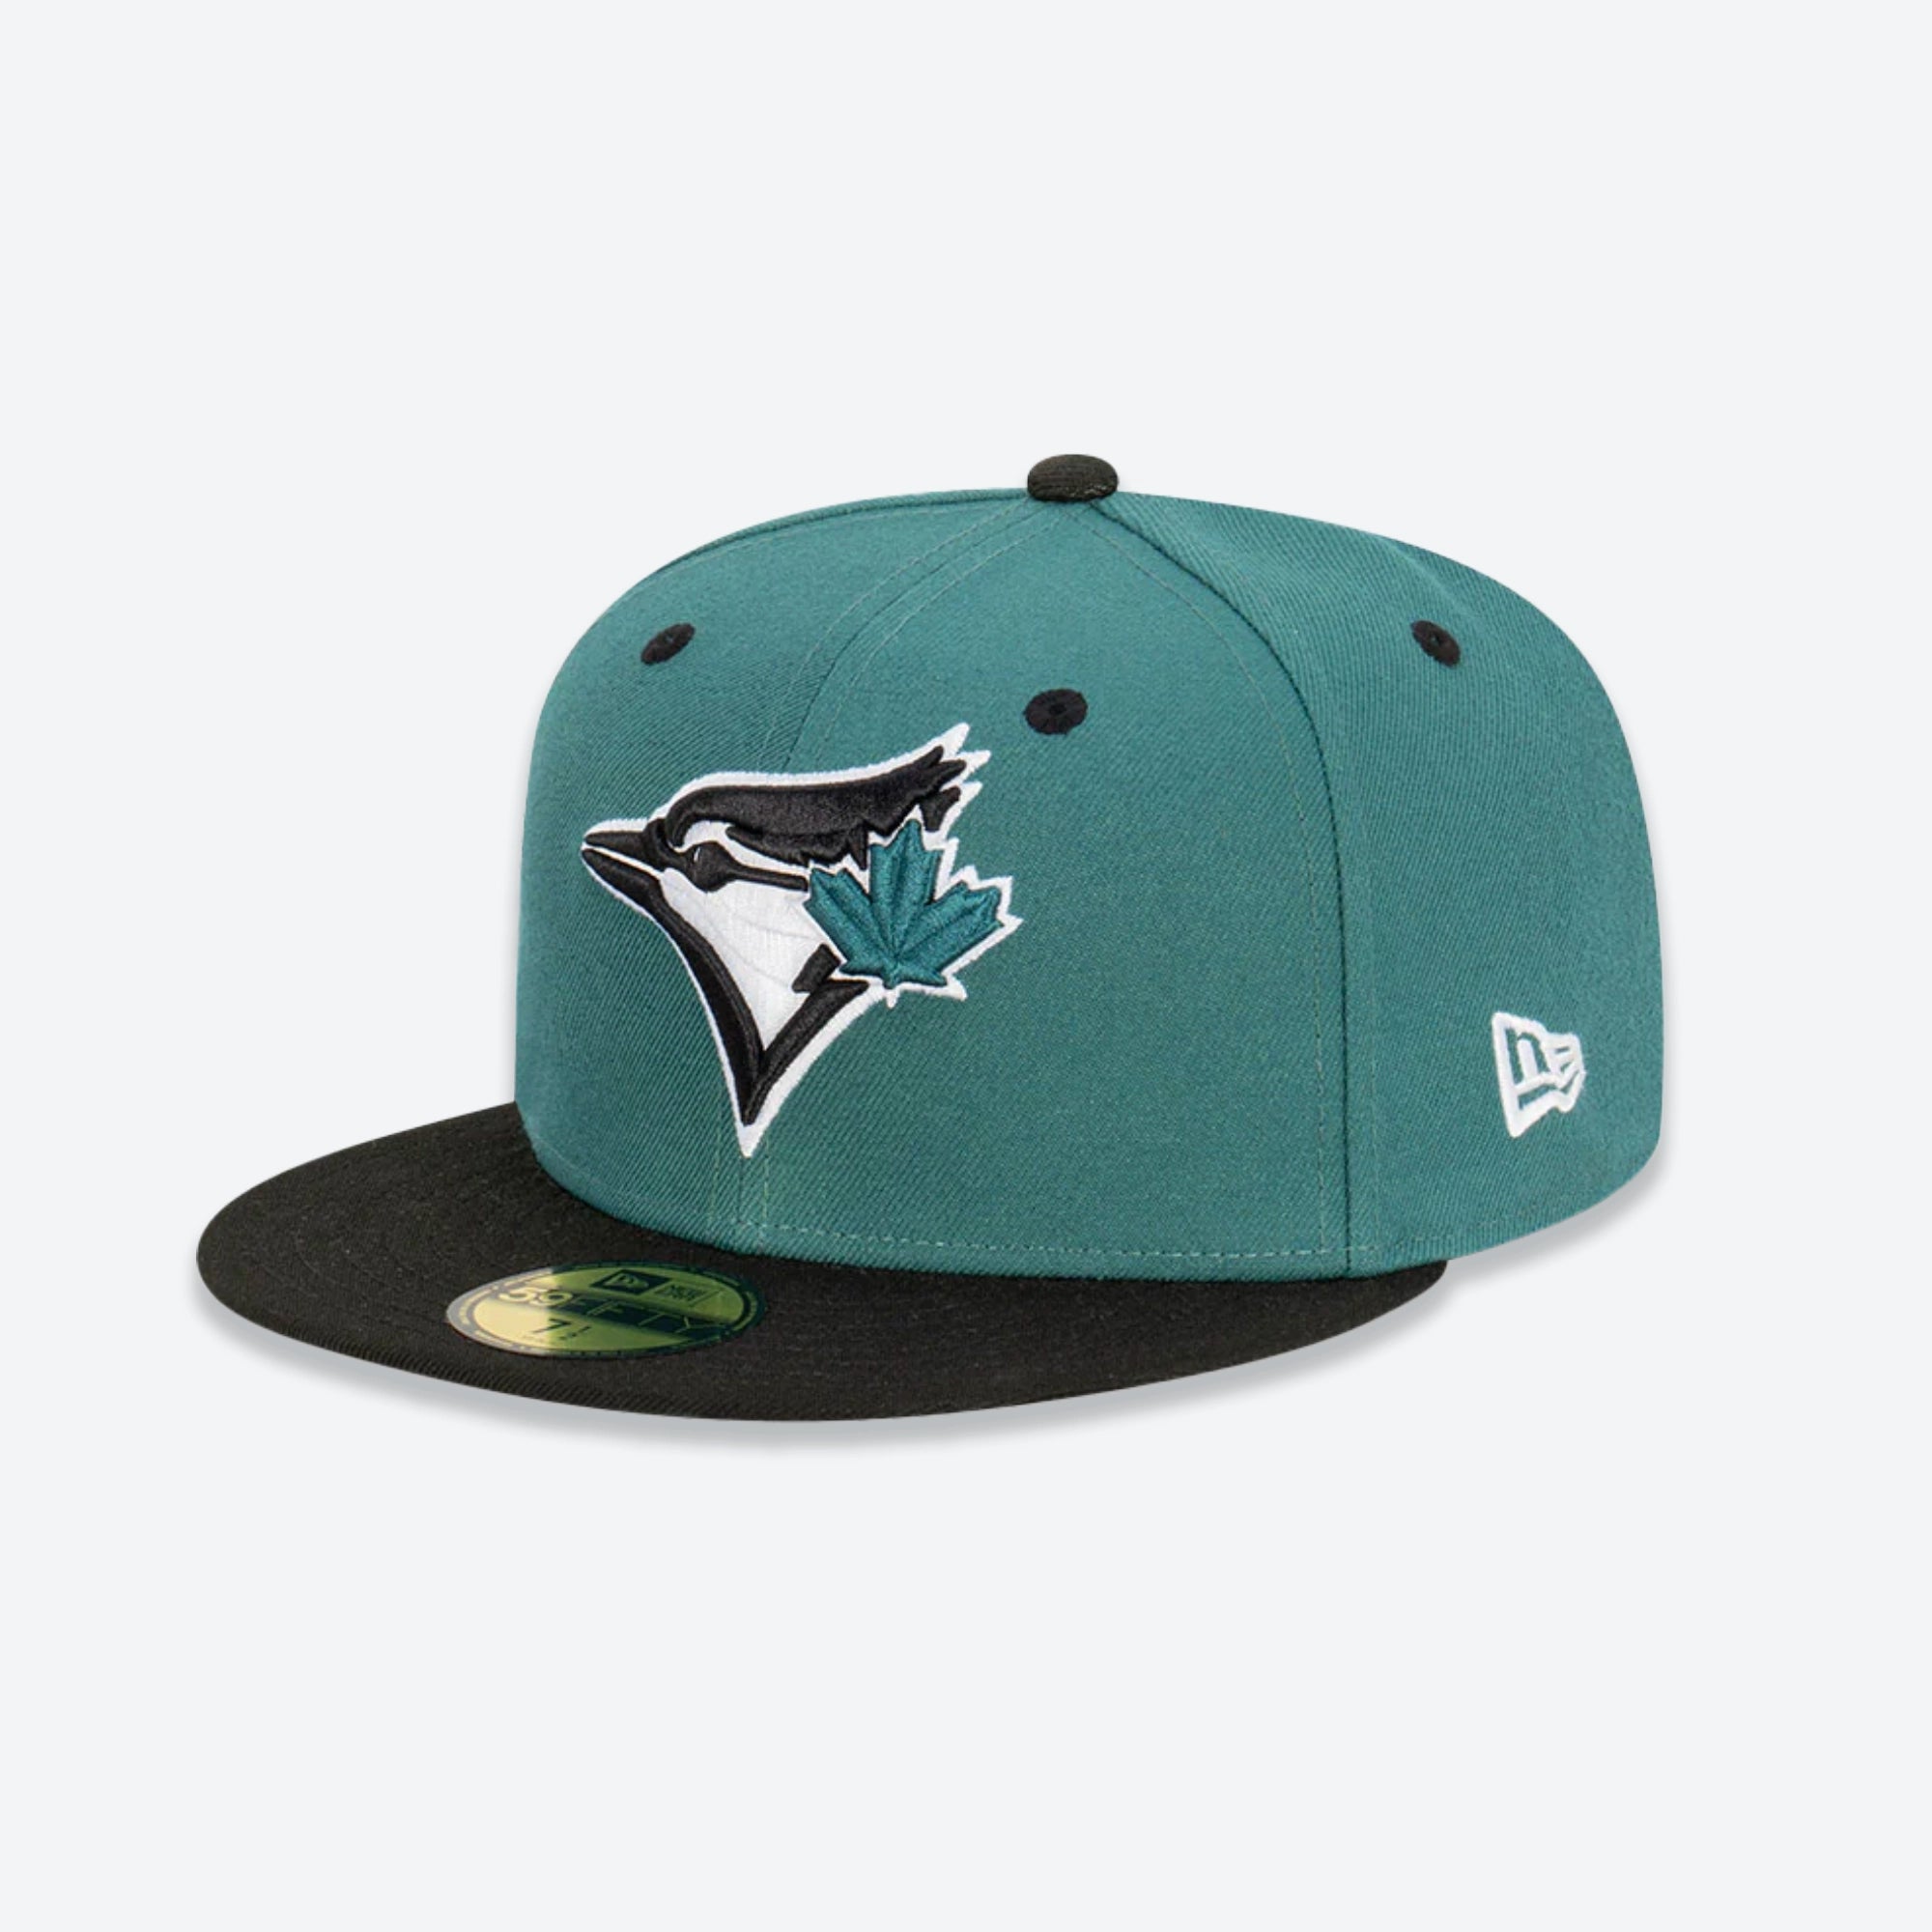 Toronto Blue Jays New Era 59FIFTY Fitted Hat - Gray/Teal